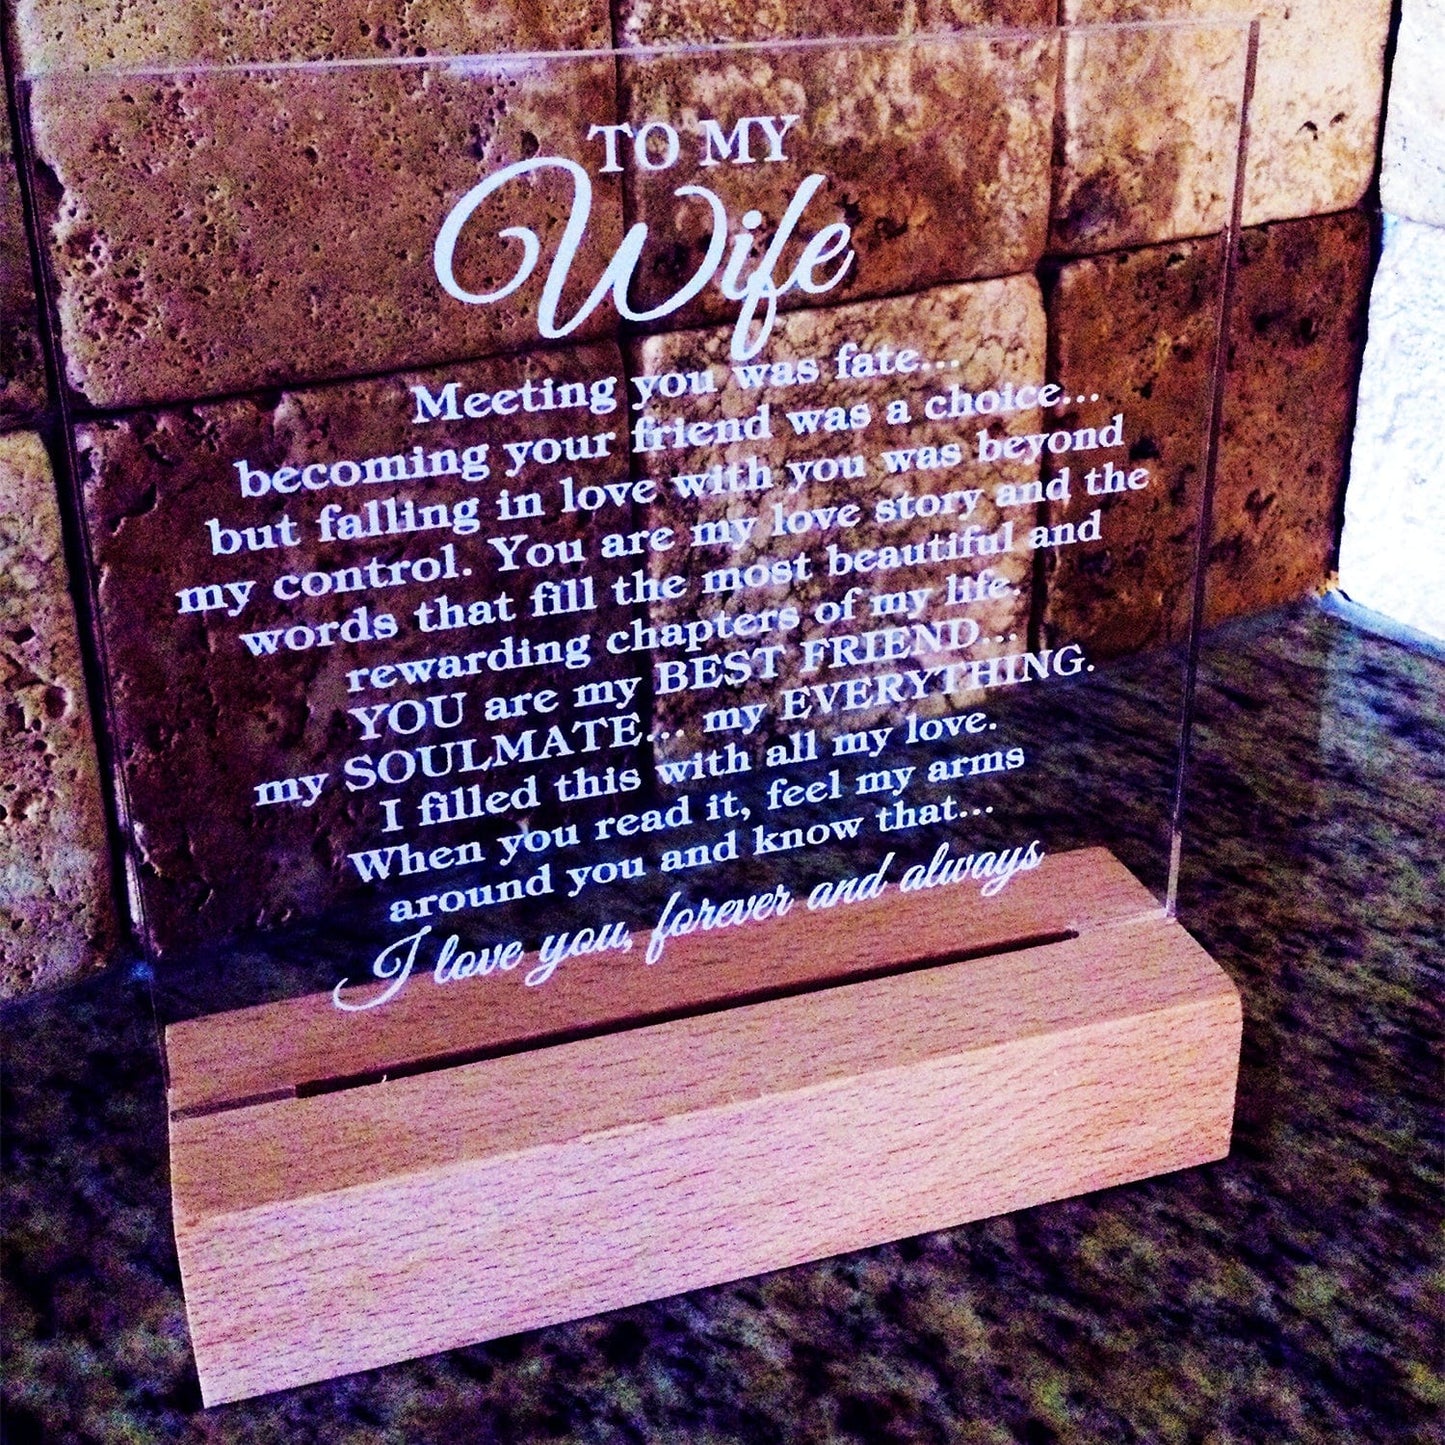 To My Wife "Meeting you was..." Acrylic Plaque